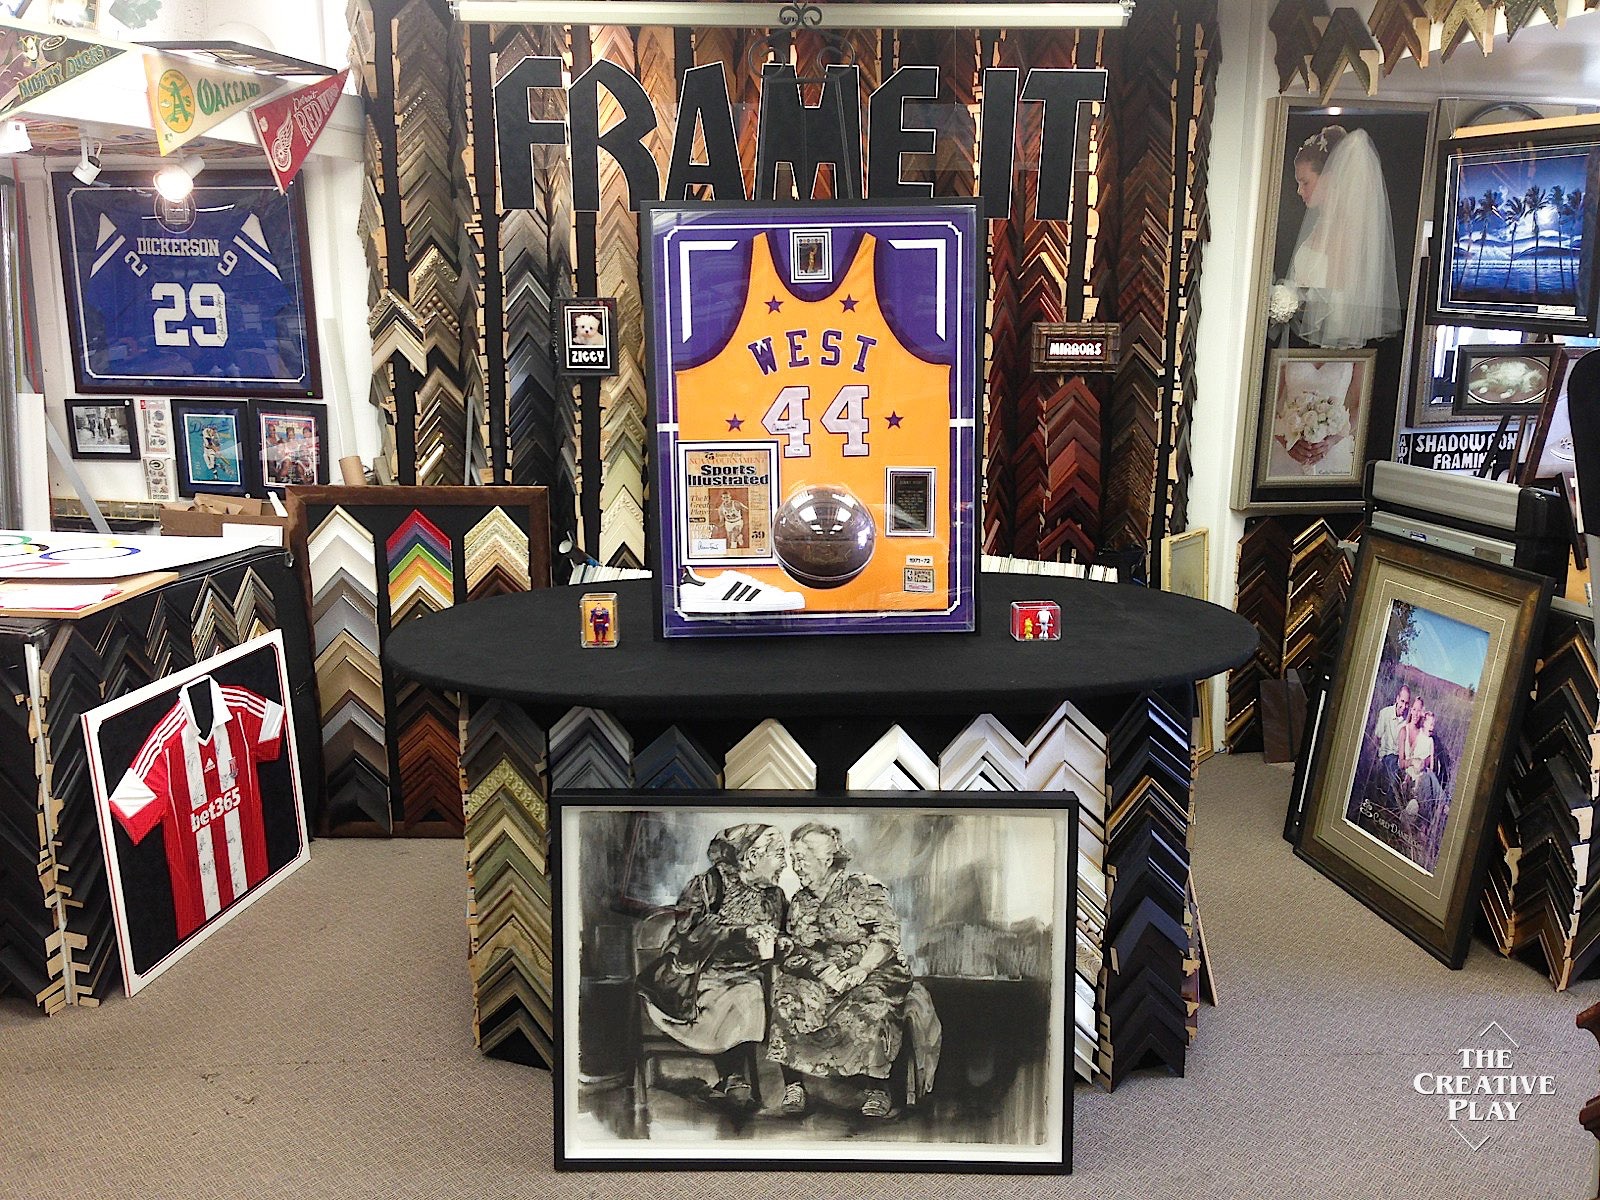 Pin by The Creative Play on Creative Jersey Framing